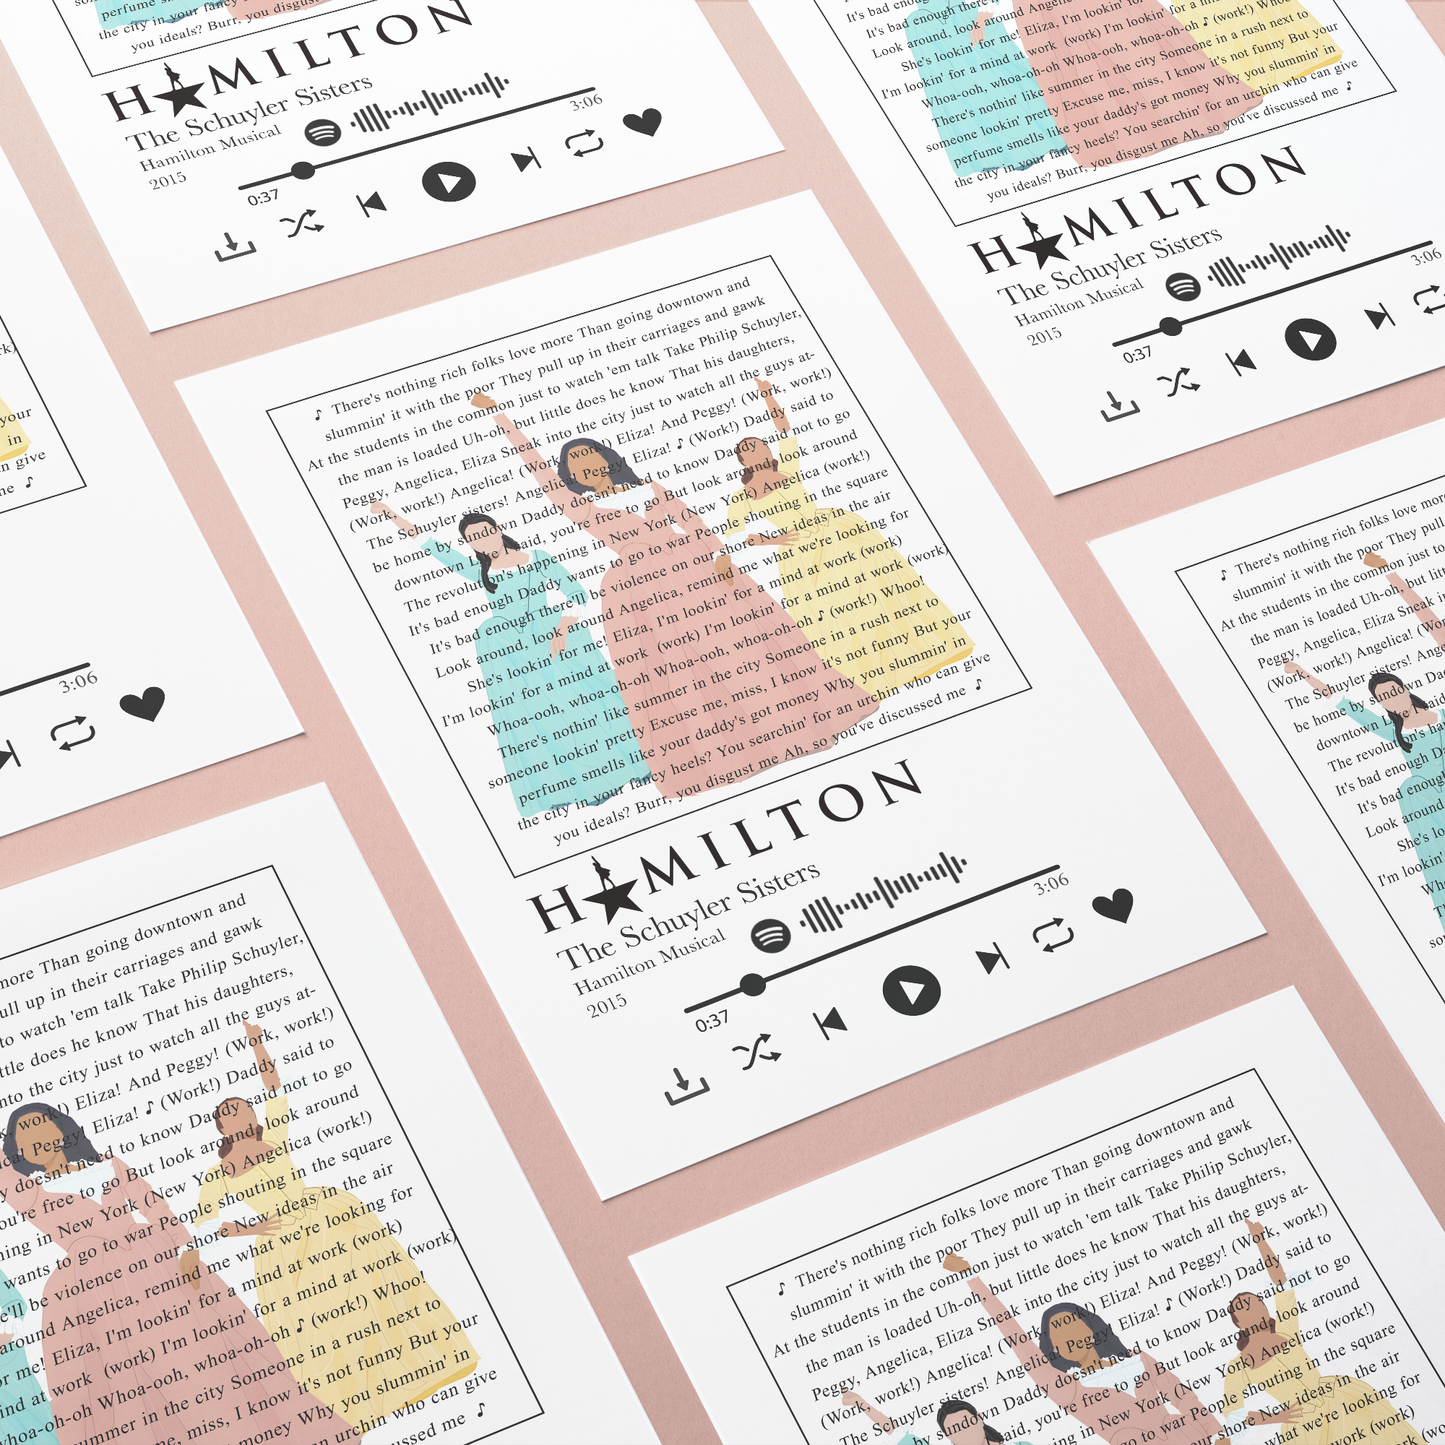 Let your walls do the singing with the Hamilton - The Schuyler Sisters Prints! Customise your own lyrical statement with any song lyric of your choice, brought to life in stunning wall art. It'll be music to your ears, guaranteed! (Pun absolutely intended).